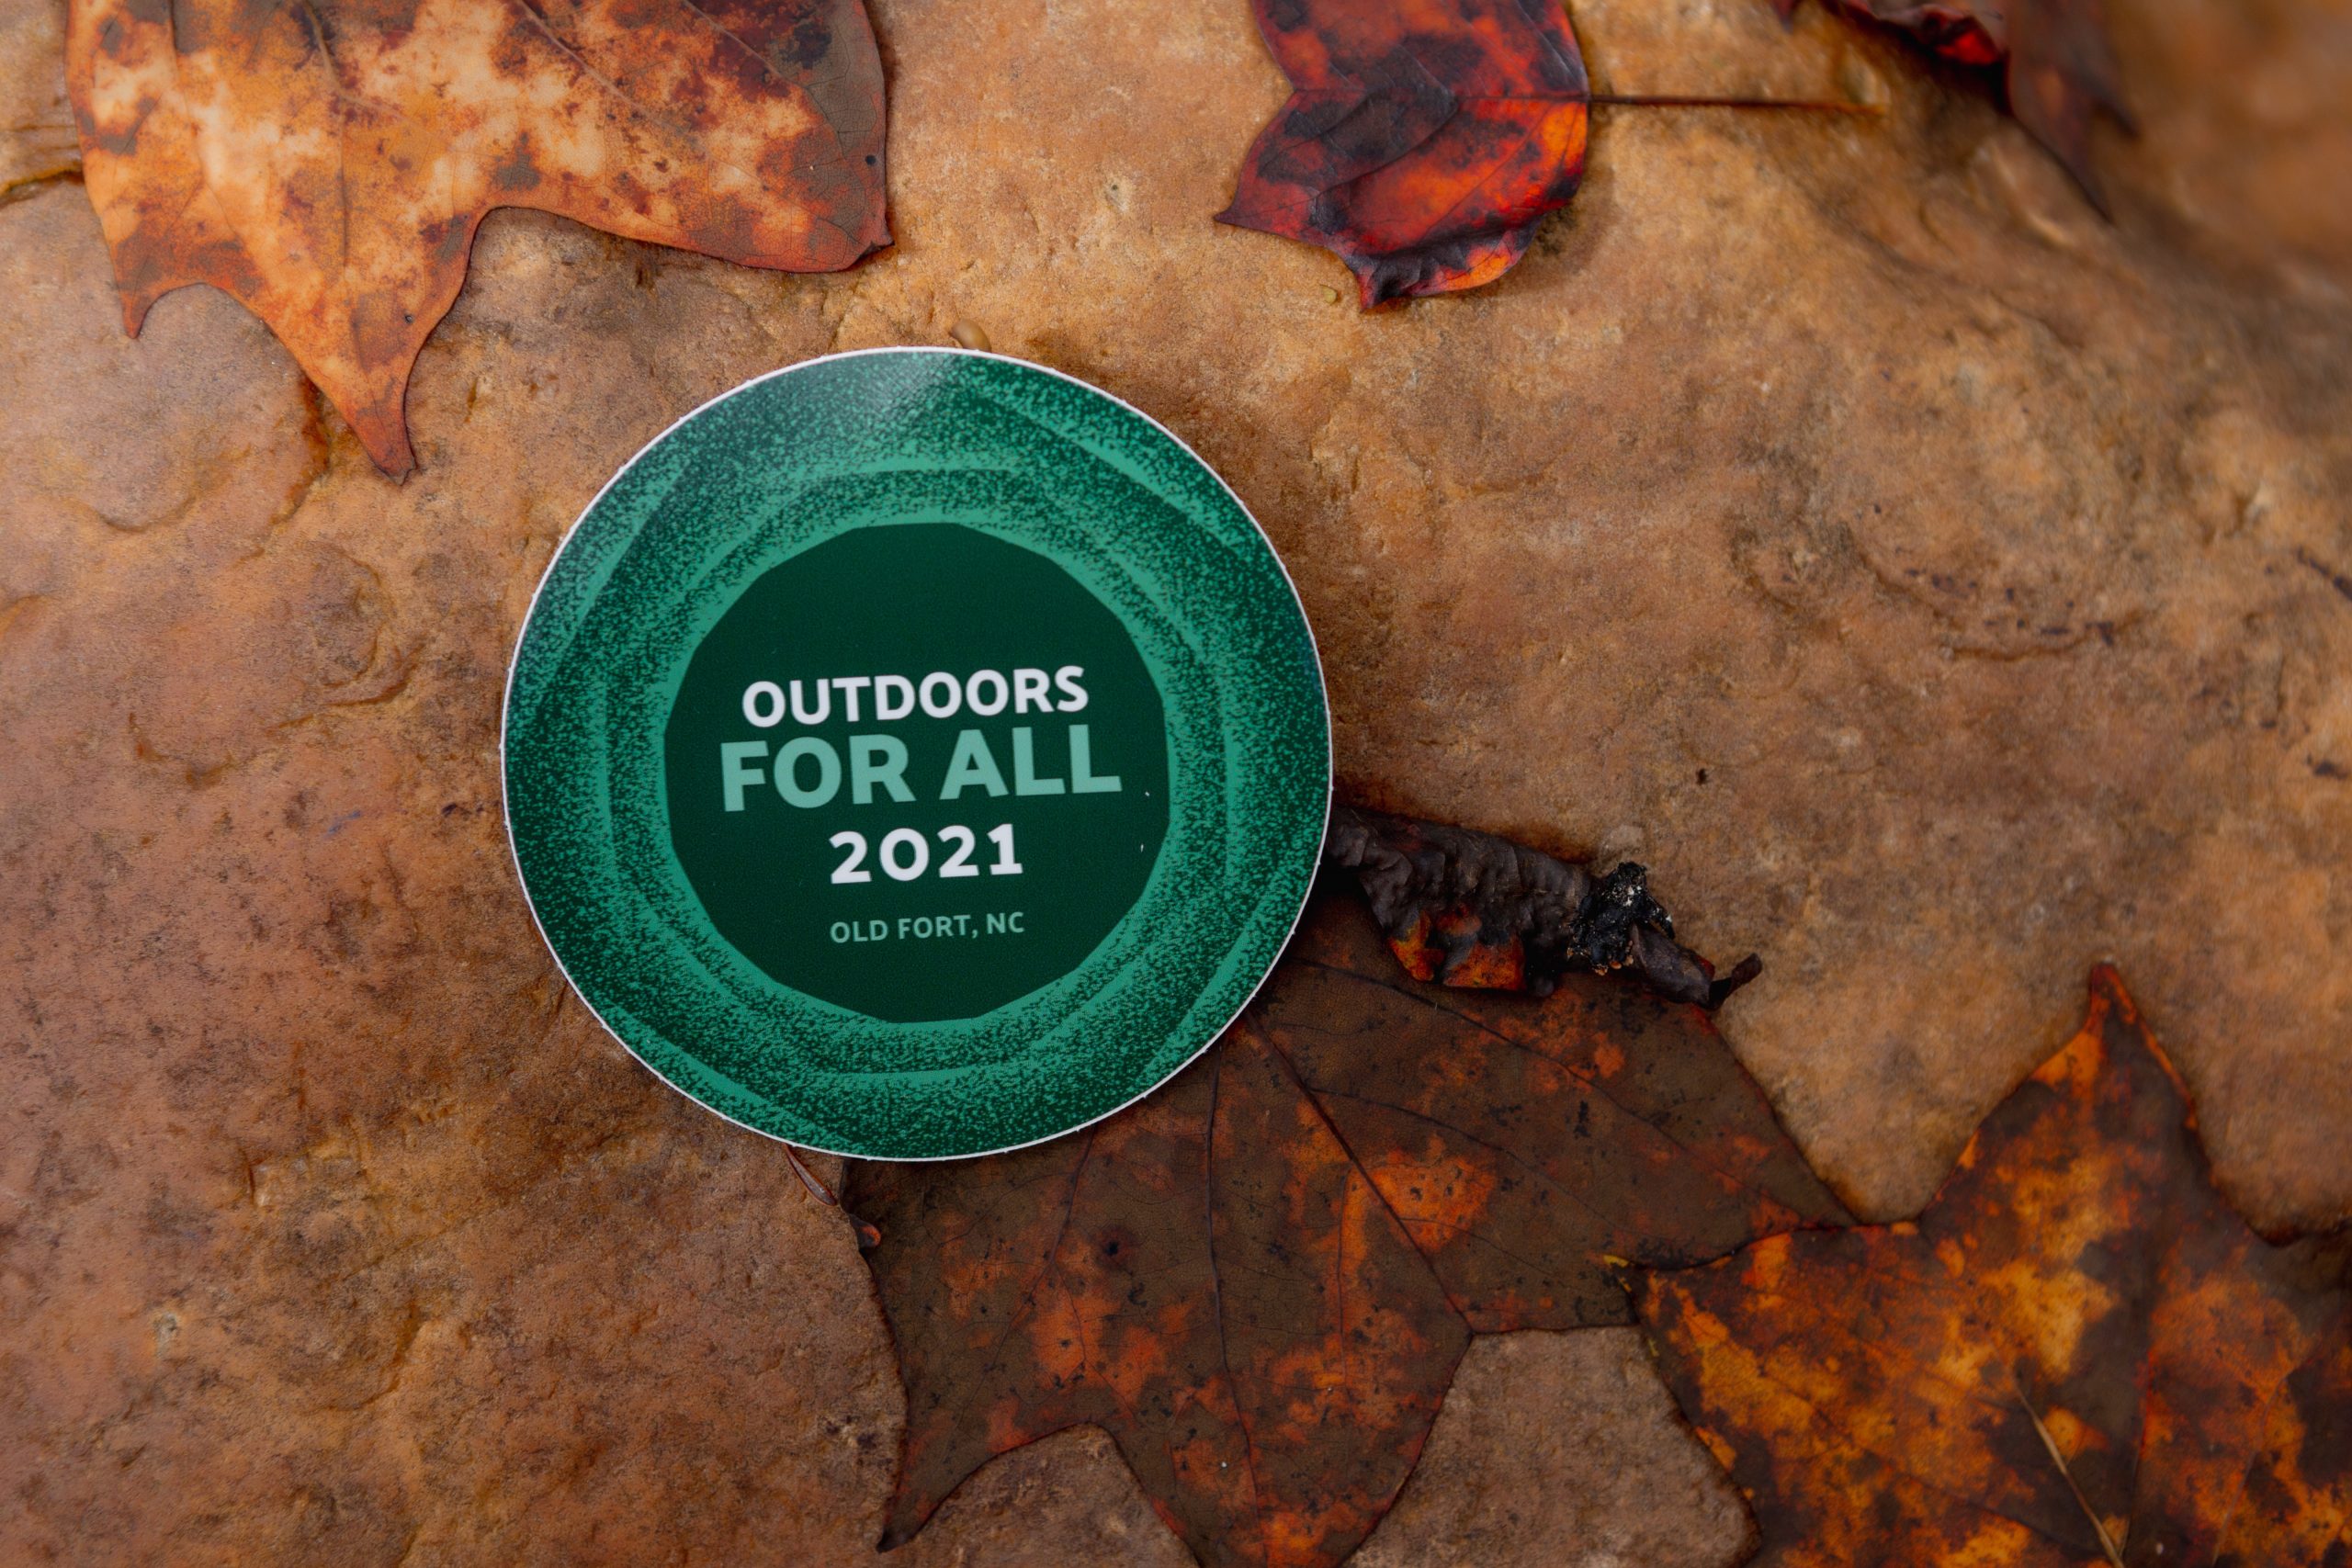 A button says "Outdoors for All 2021" and sits on a bed of scattered leaves.